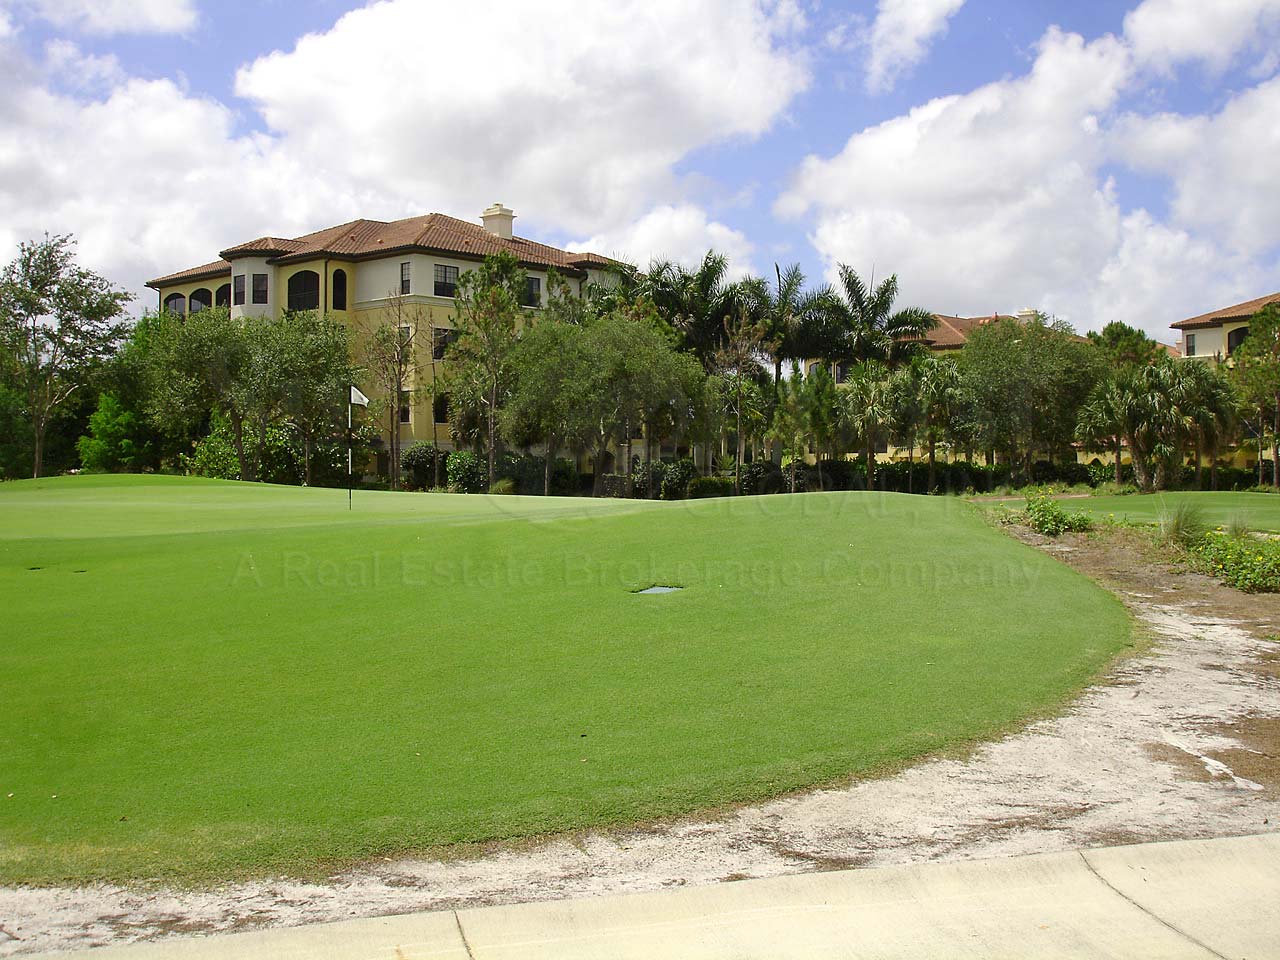 Marquesa Royale View of Golf Course